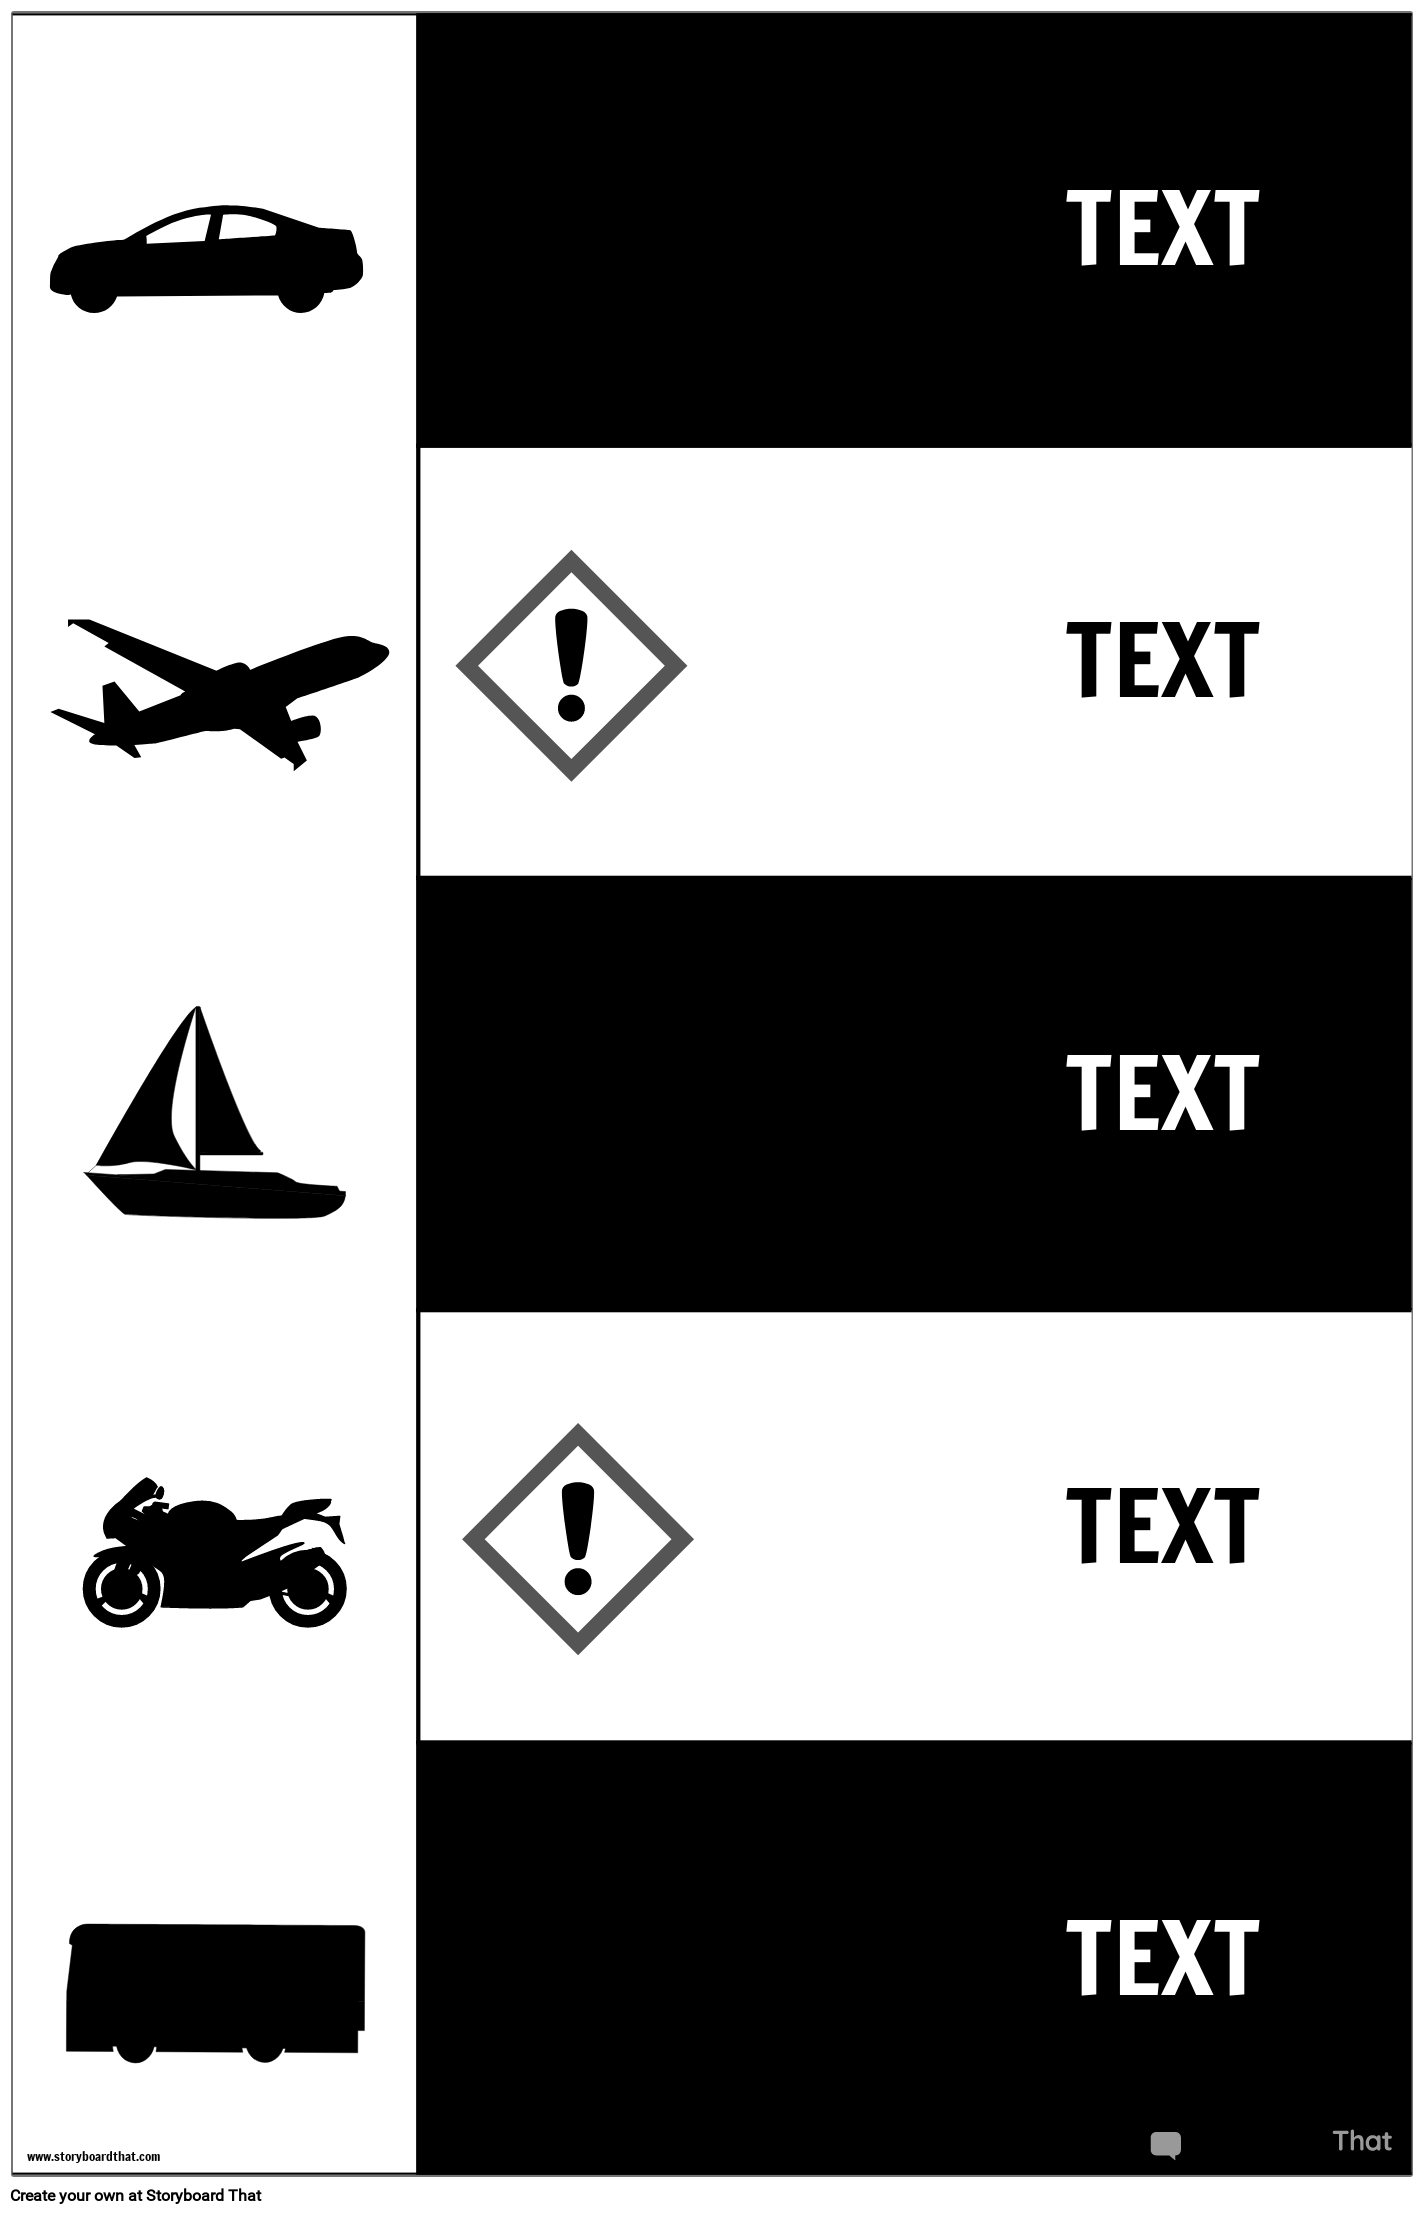 PSA Template with Vehicles